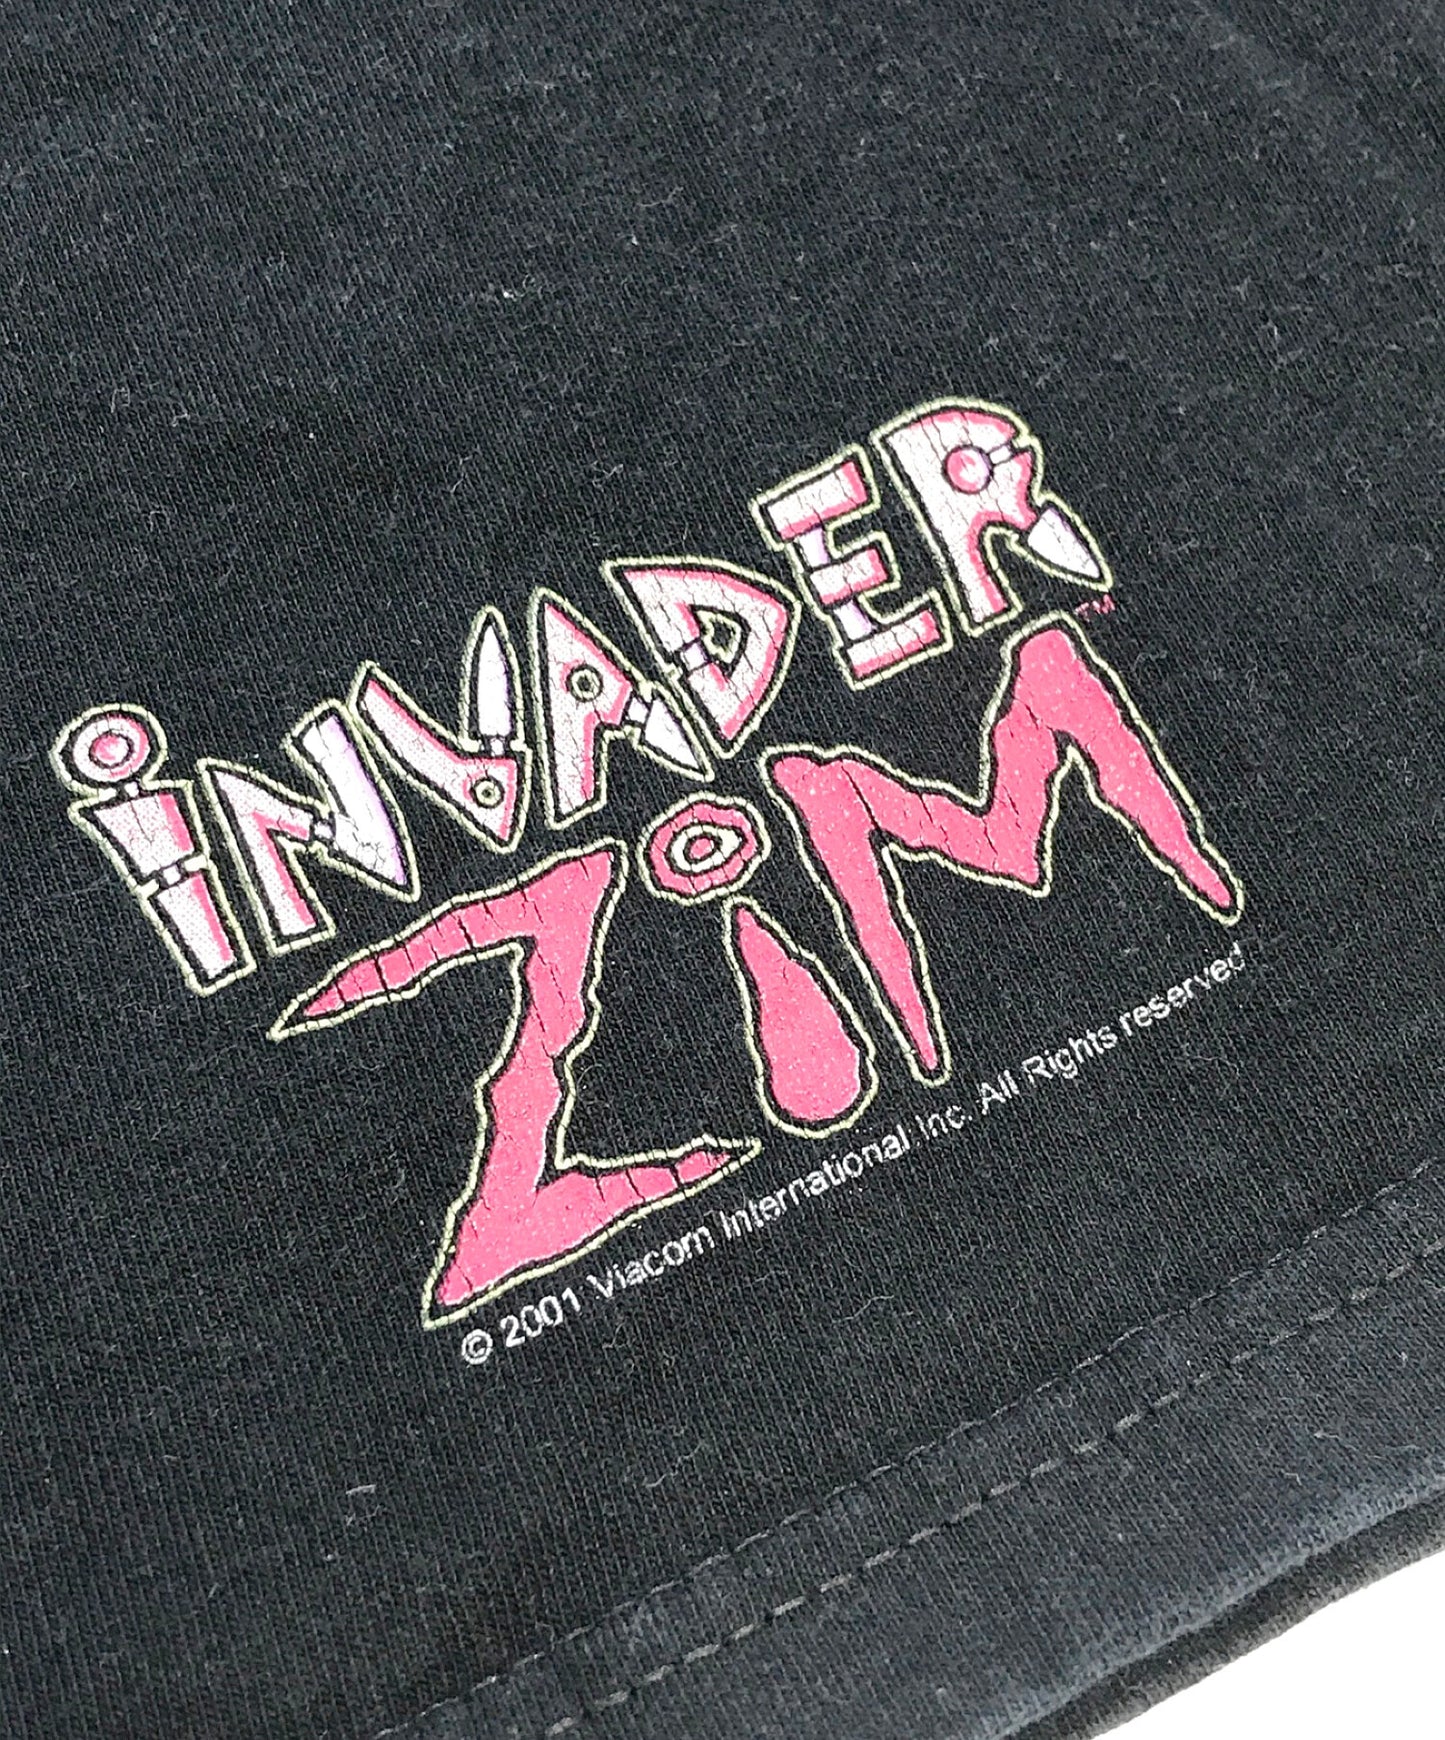 INVADER ZIM [Secondhand Clothing] Anime Tee